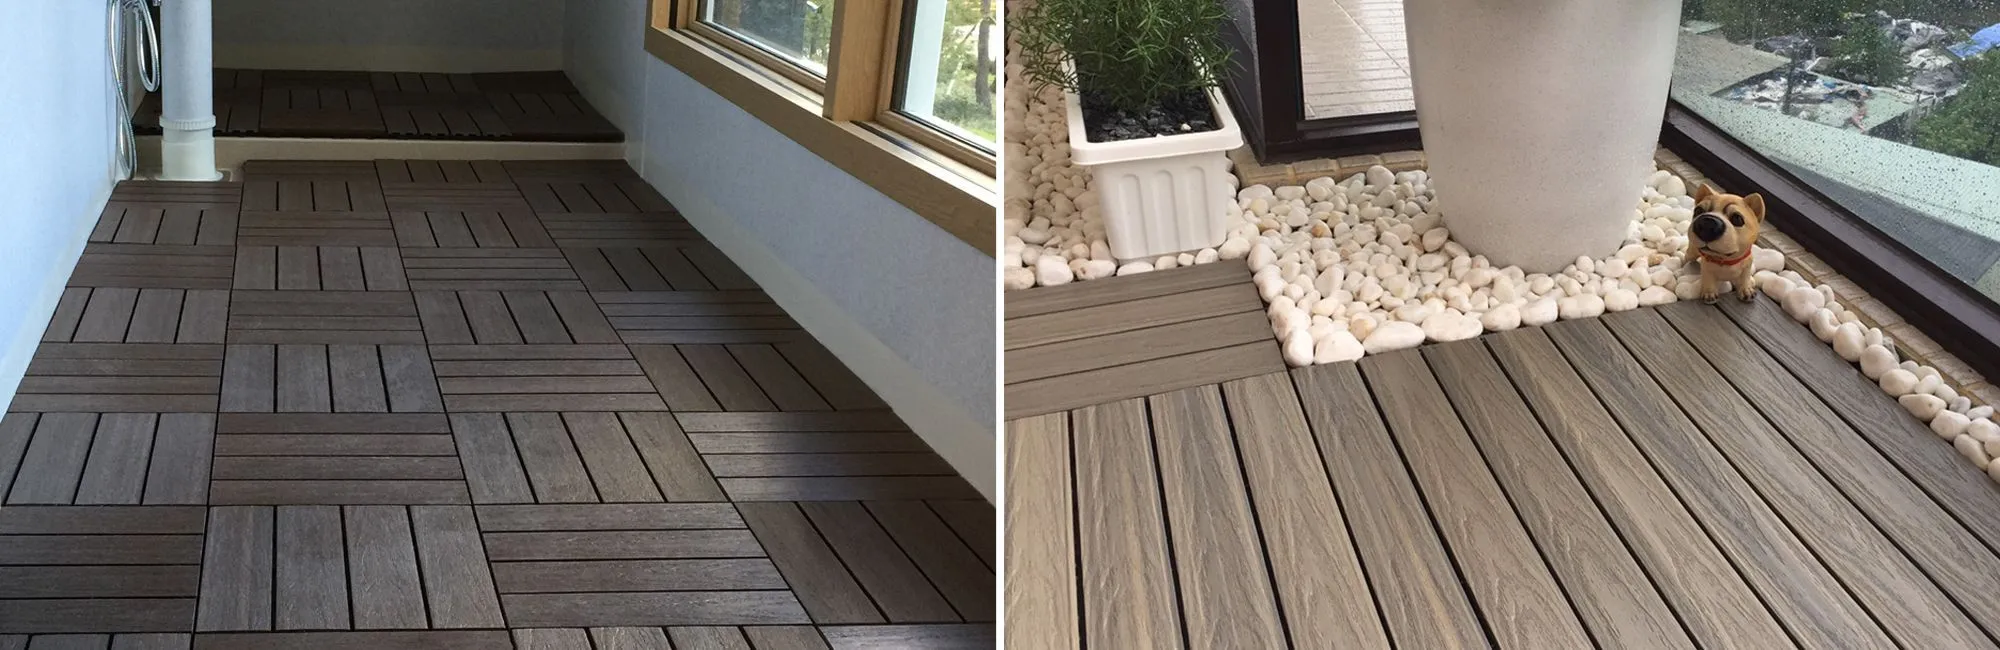 Composite Deck Tiles Decking Squares, Can Decking Tiles Be Laid On Grass